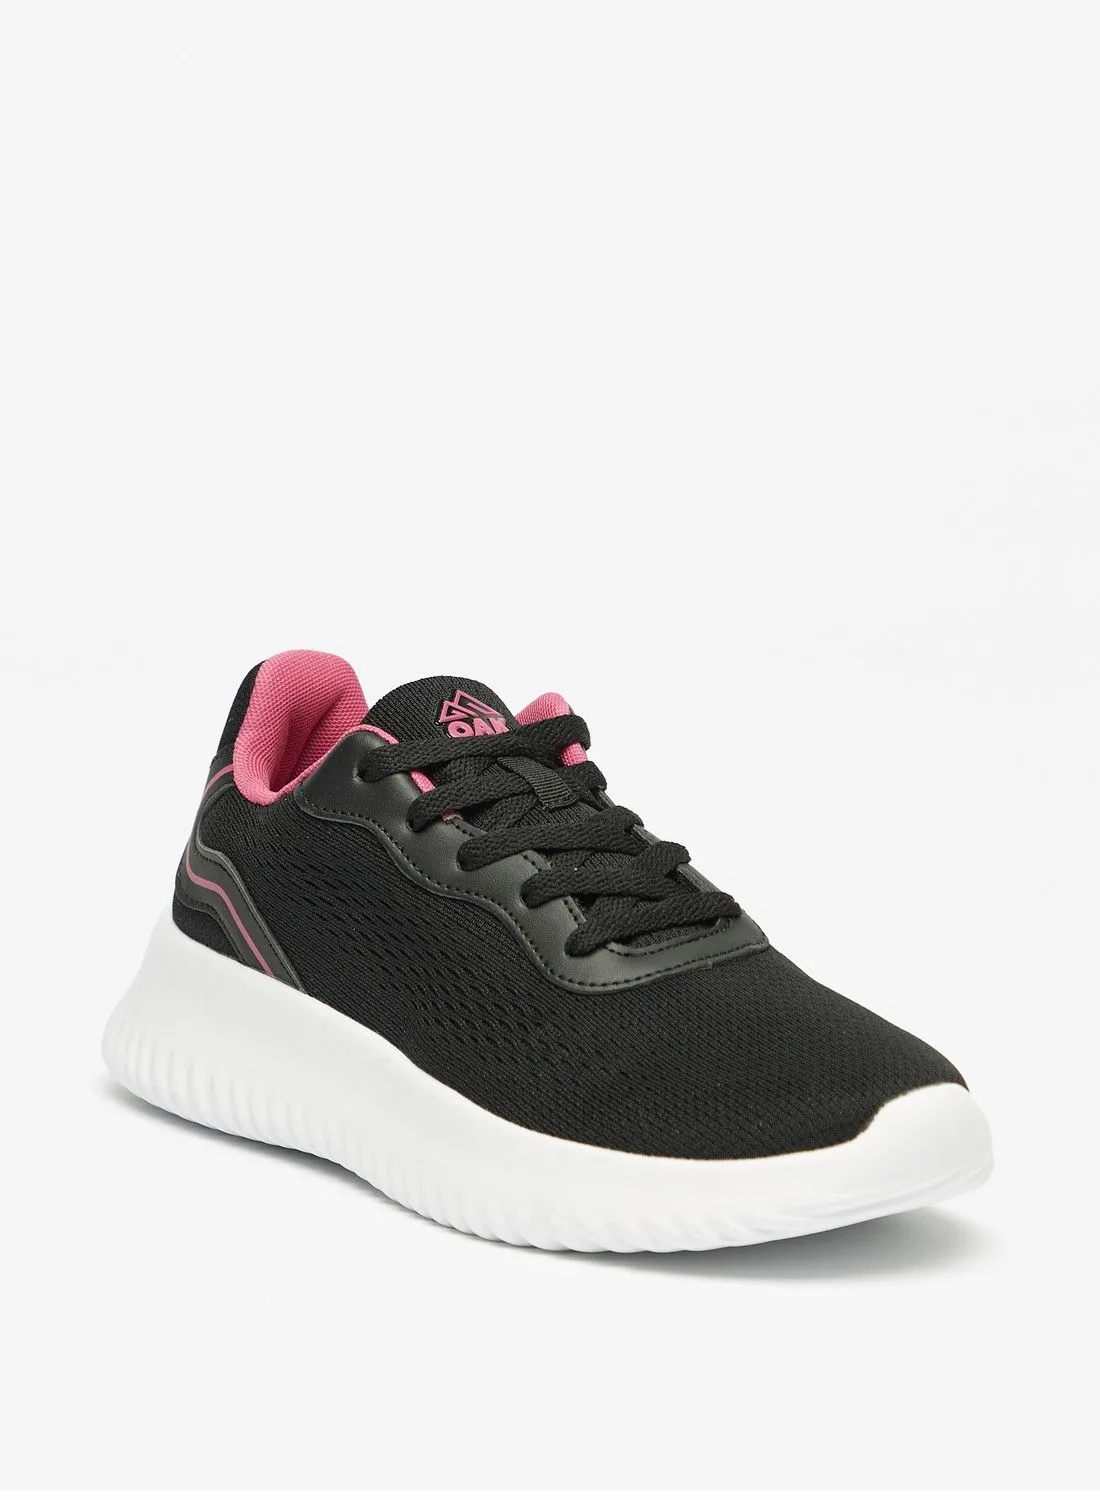 OAKLAN Textured Sports Shoes with Lace Up Closure